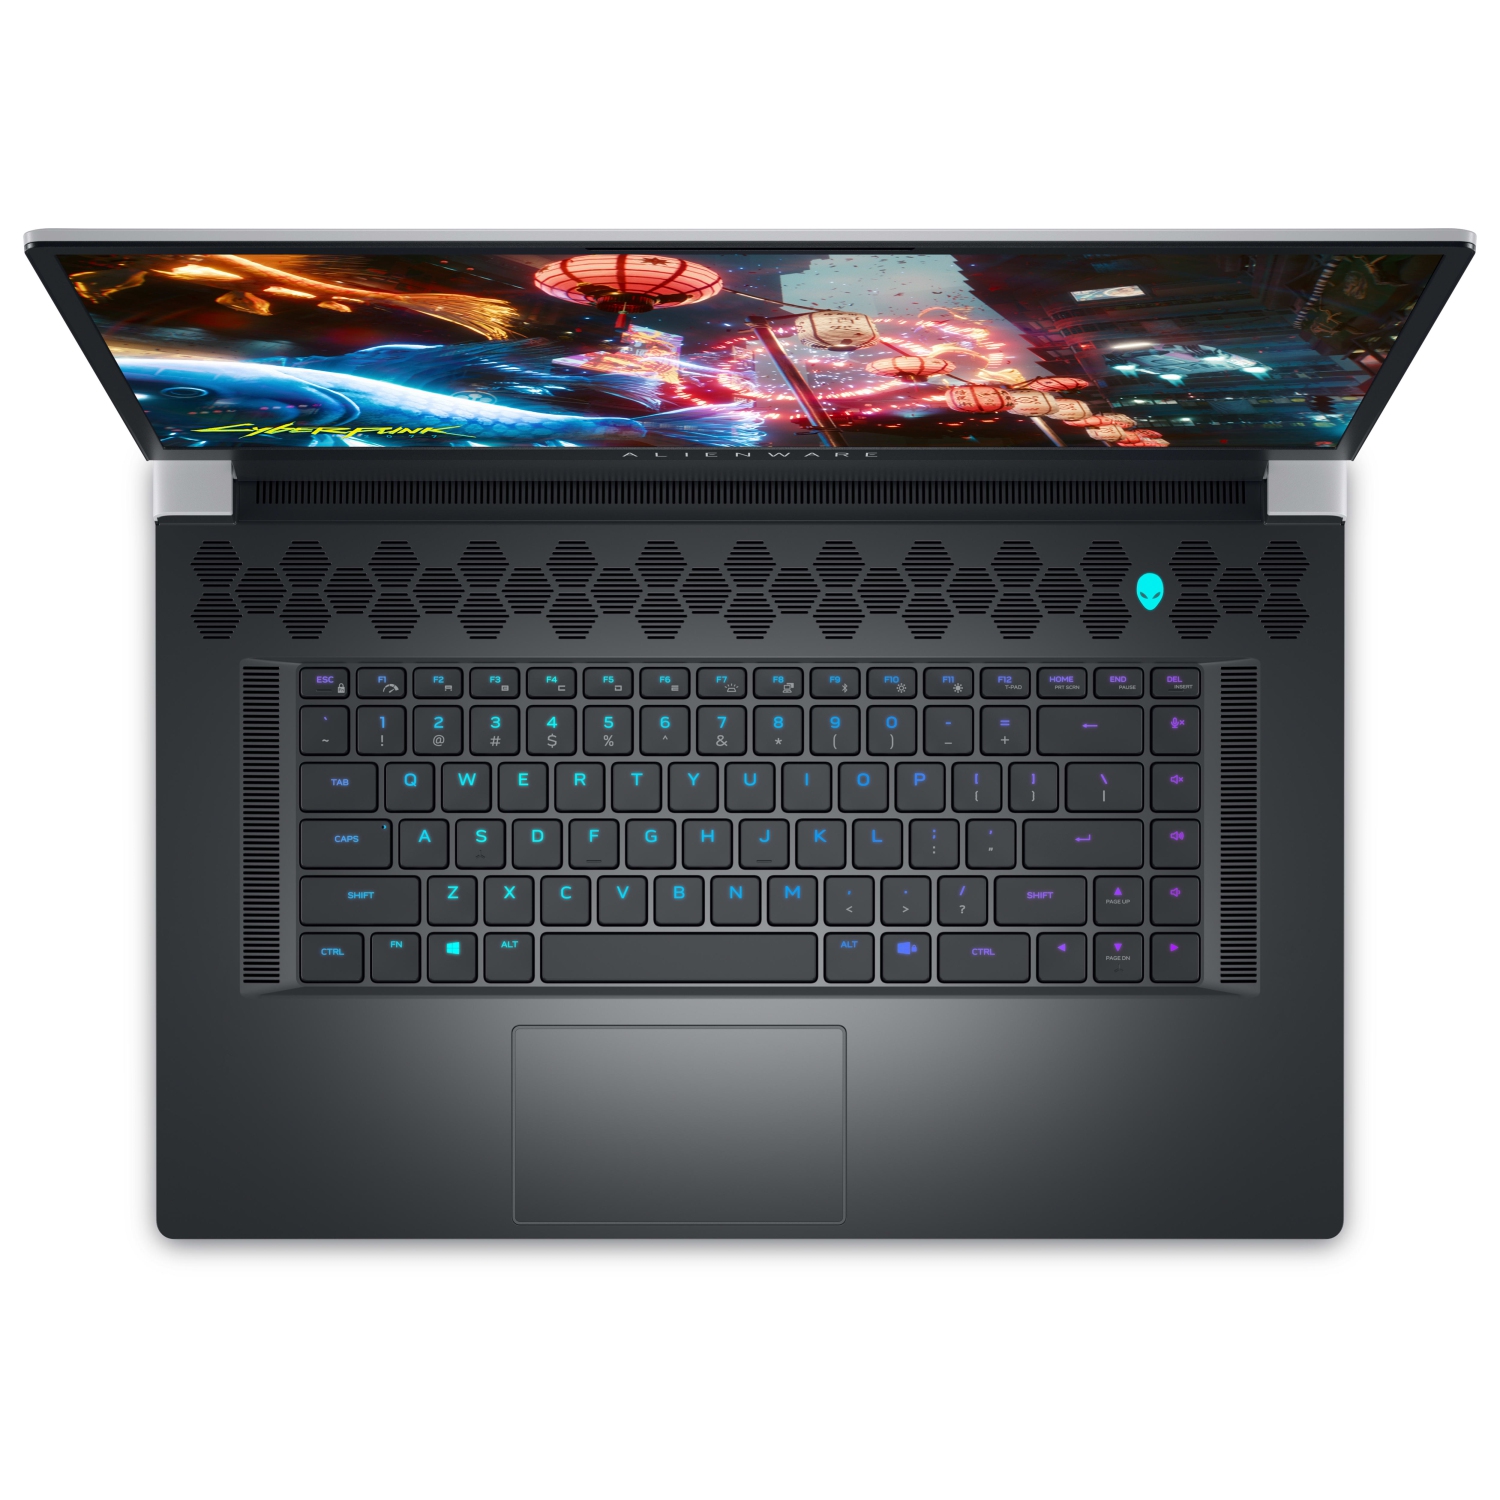 Refurbished (Excellent) – Dell Alienware X17 R2 Gaming Laptop (2022) | 17.3" FHD | Core i9 - 512GB SSD - 32GB RAM - 3080 Ti | 14 Cores @ 5 GHz - 12th Gen CPU - 16GB GDDR6X